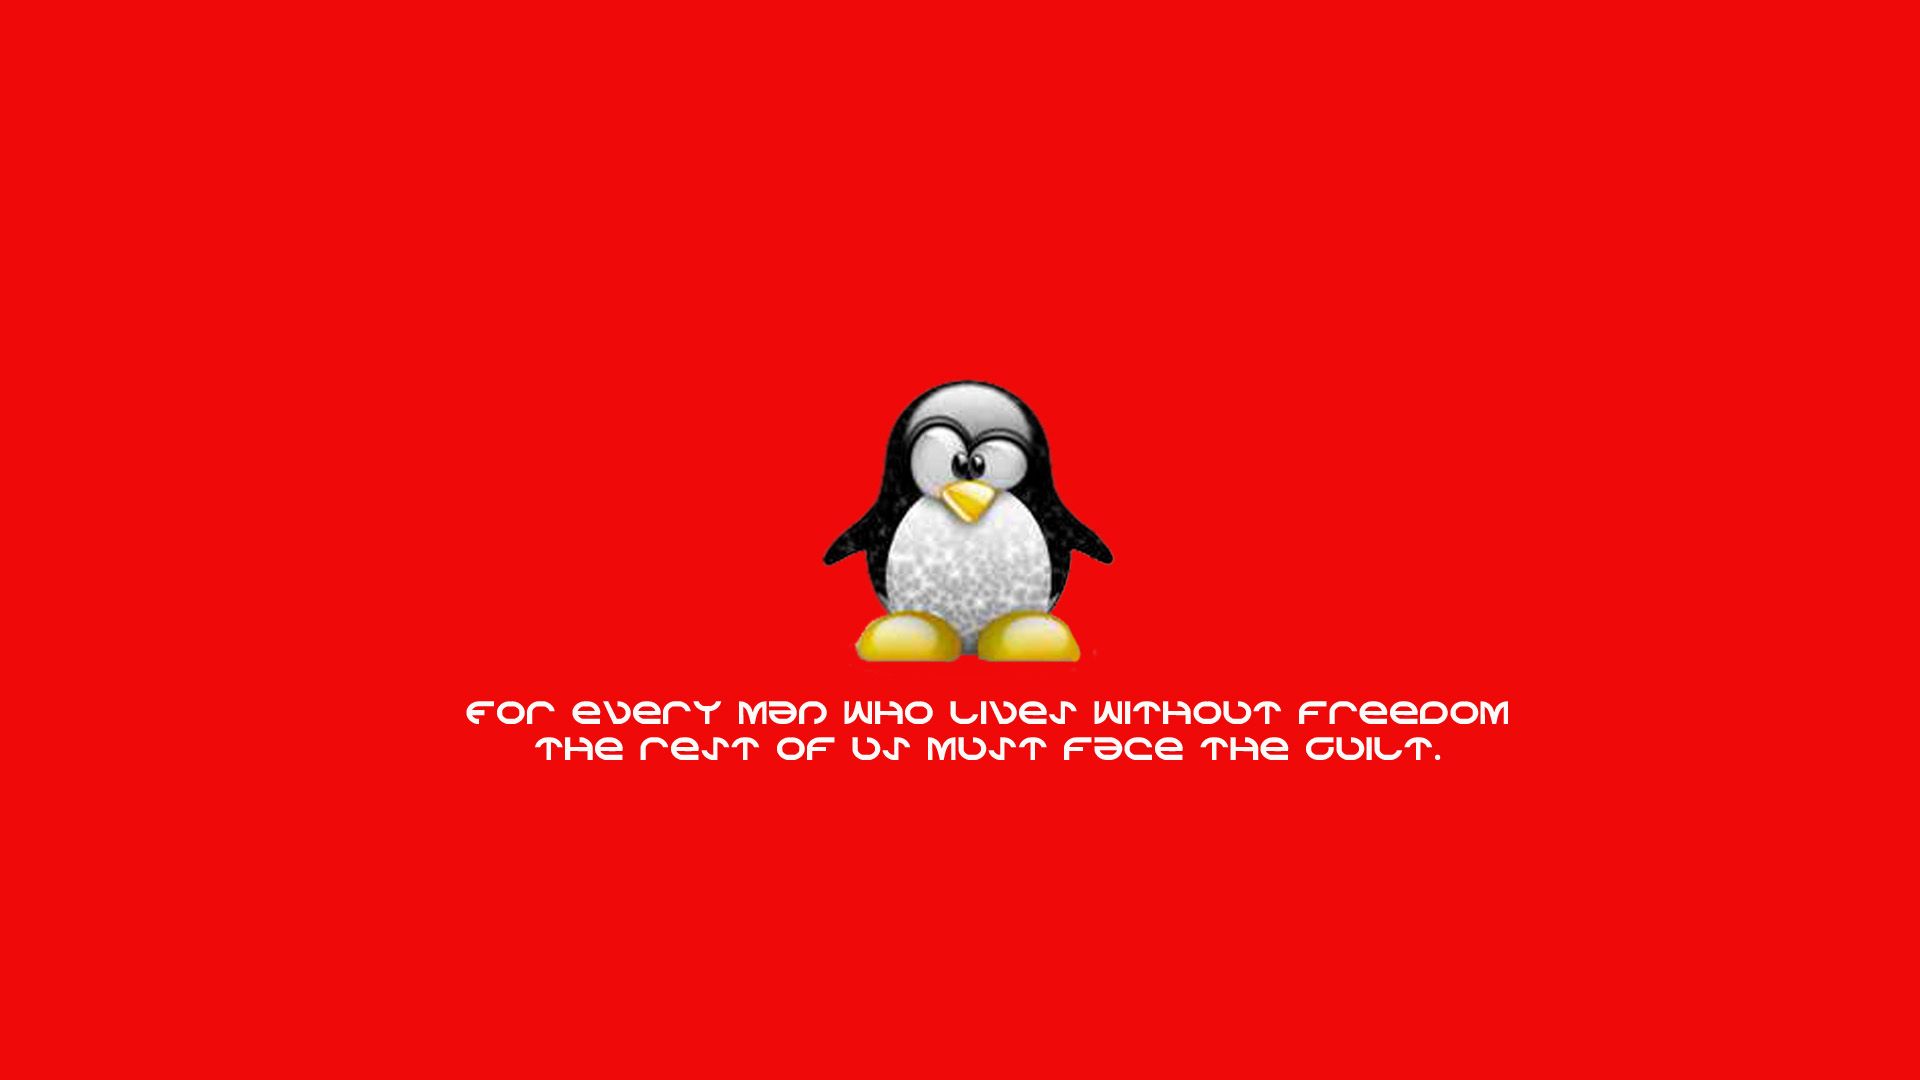 Download 45 Awesome Linux Wallpapers